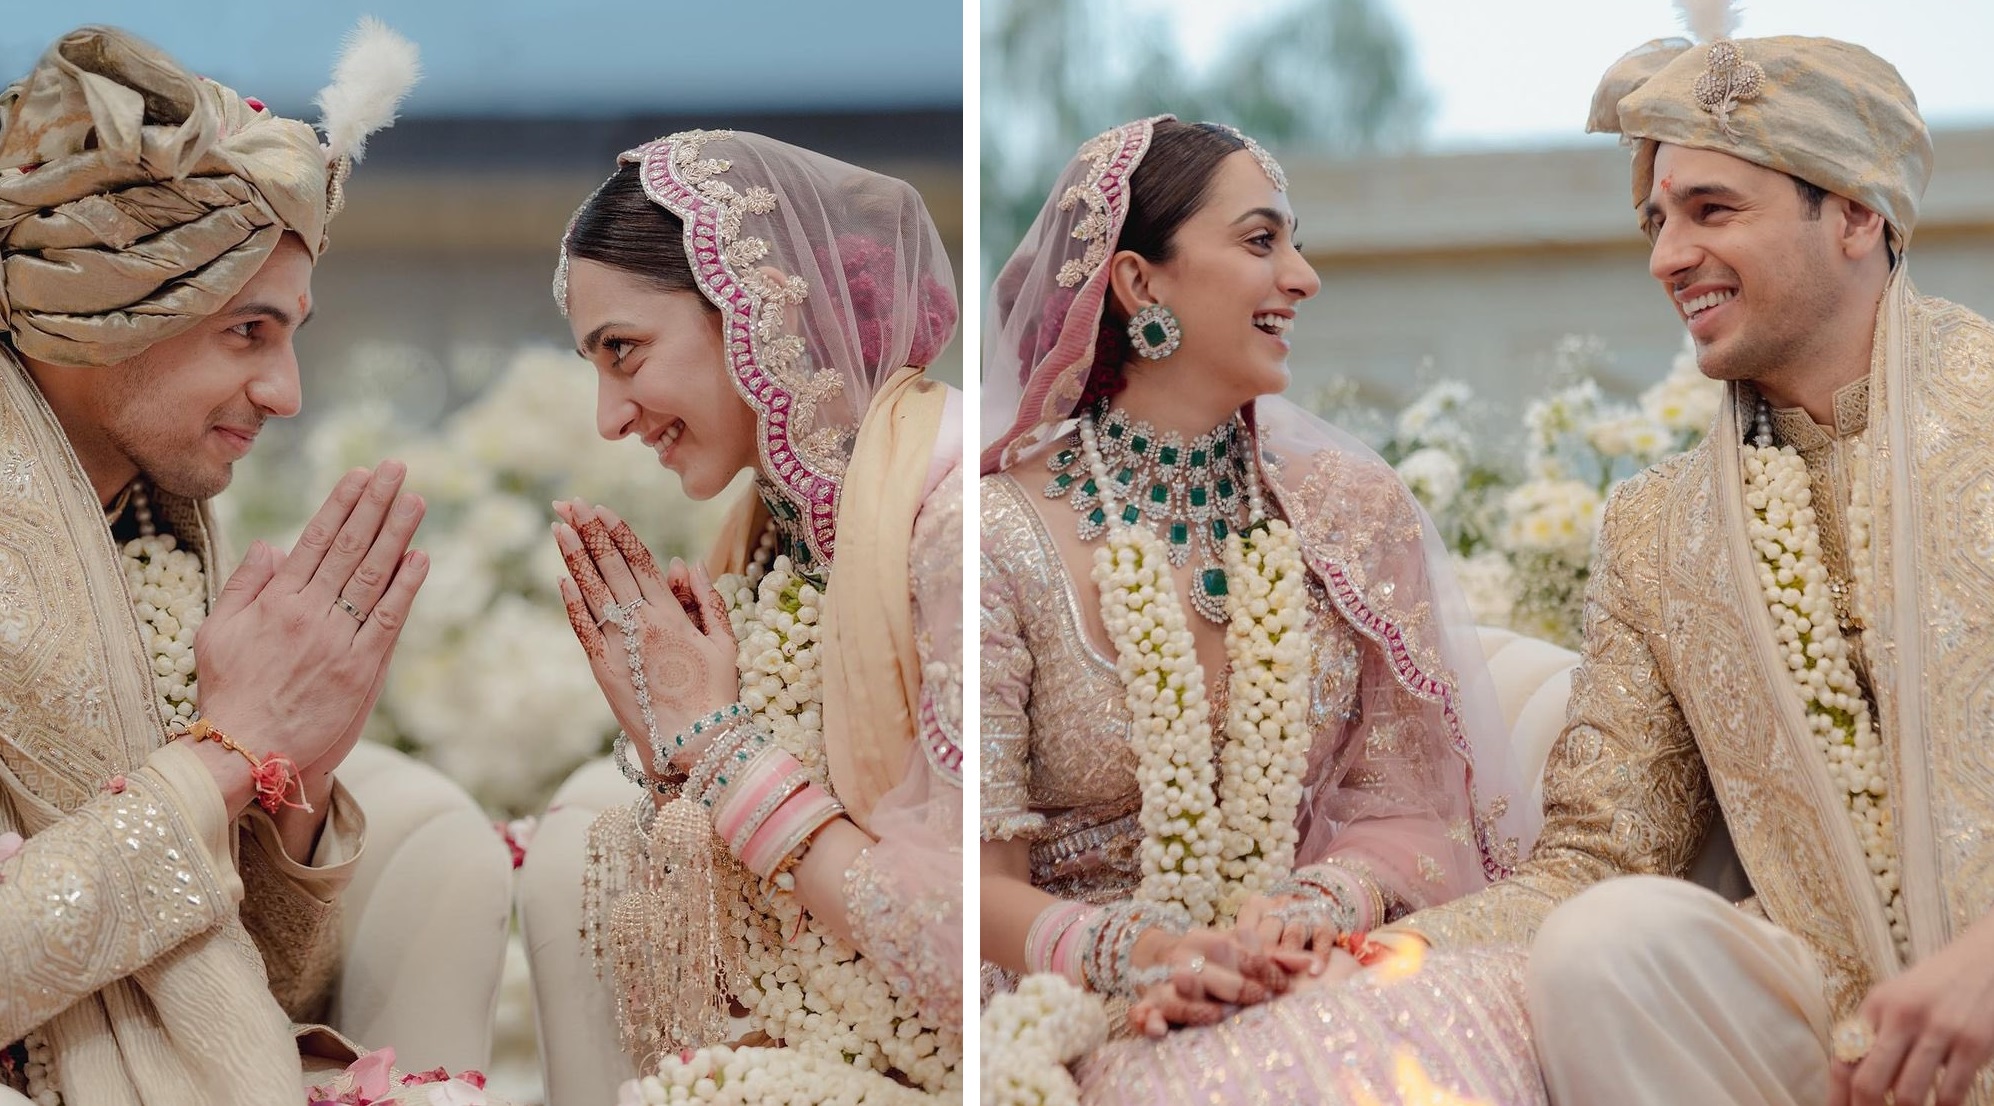 Kiara Advani & Sidharth Malhotra Are Married: See Pictures From Their Beautiful Wedding